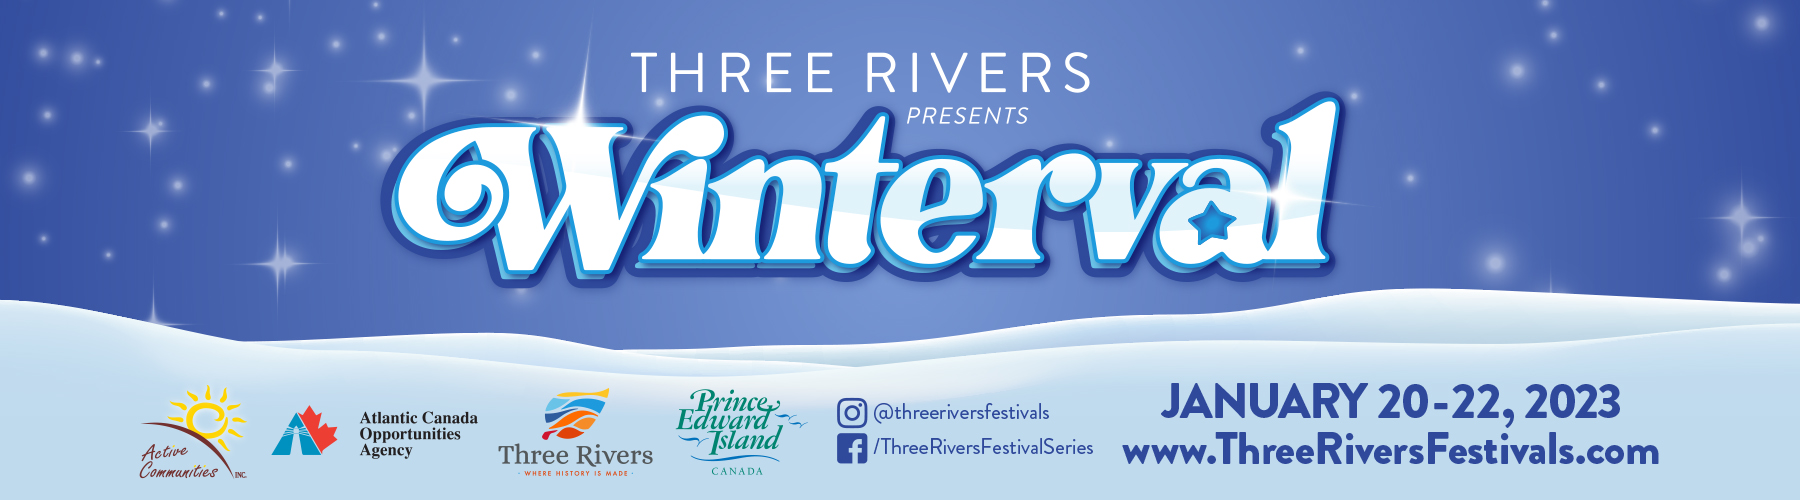 Three Rivers Winterval Winter Festival event for Three Rivers municipalities in PEI